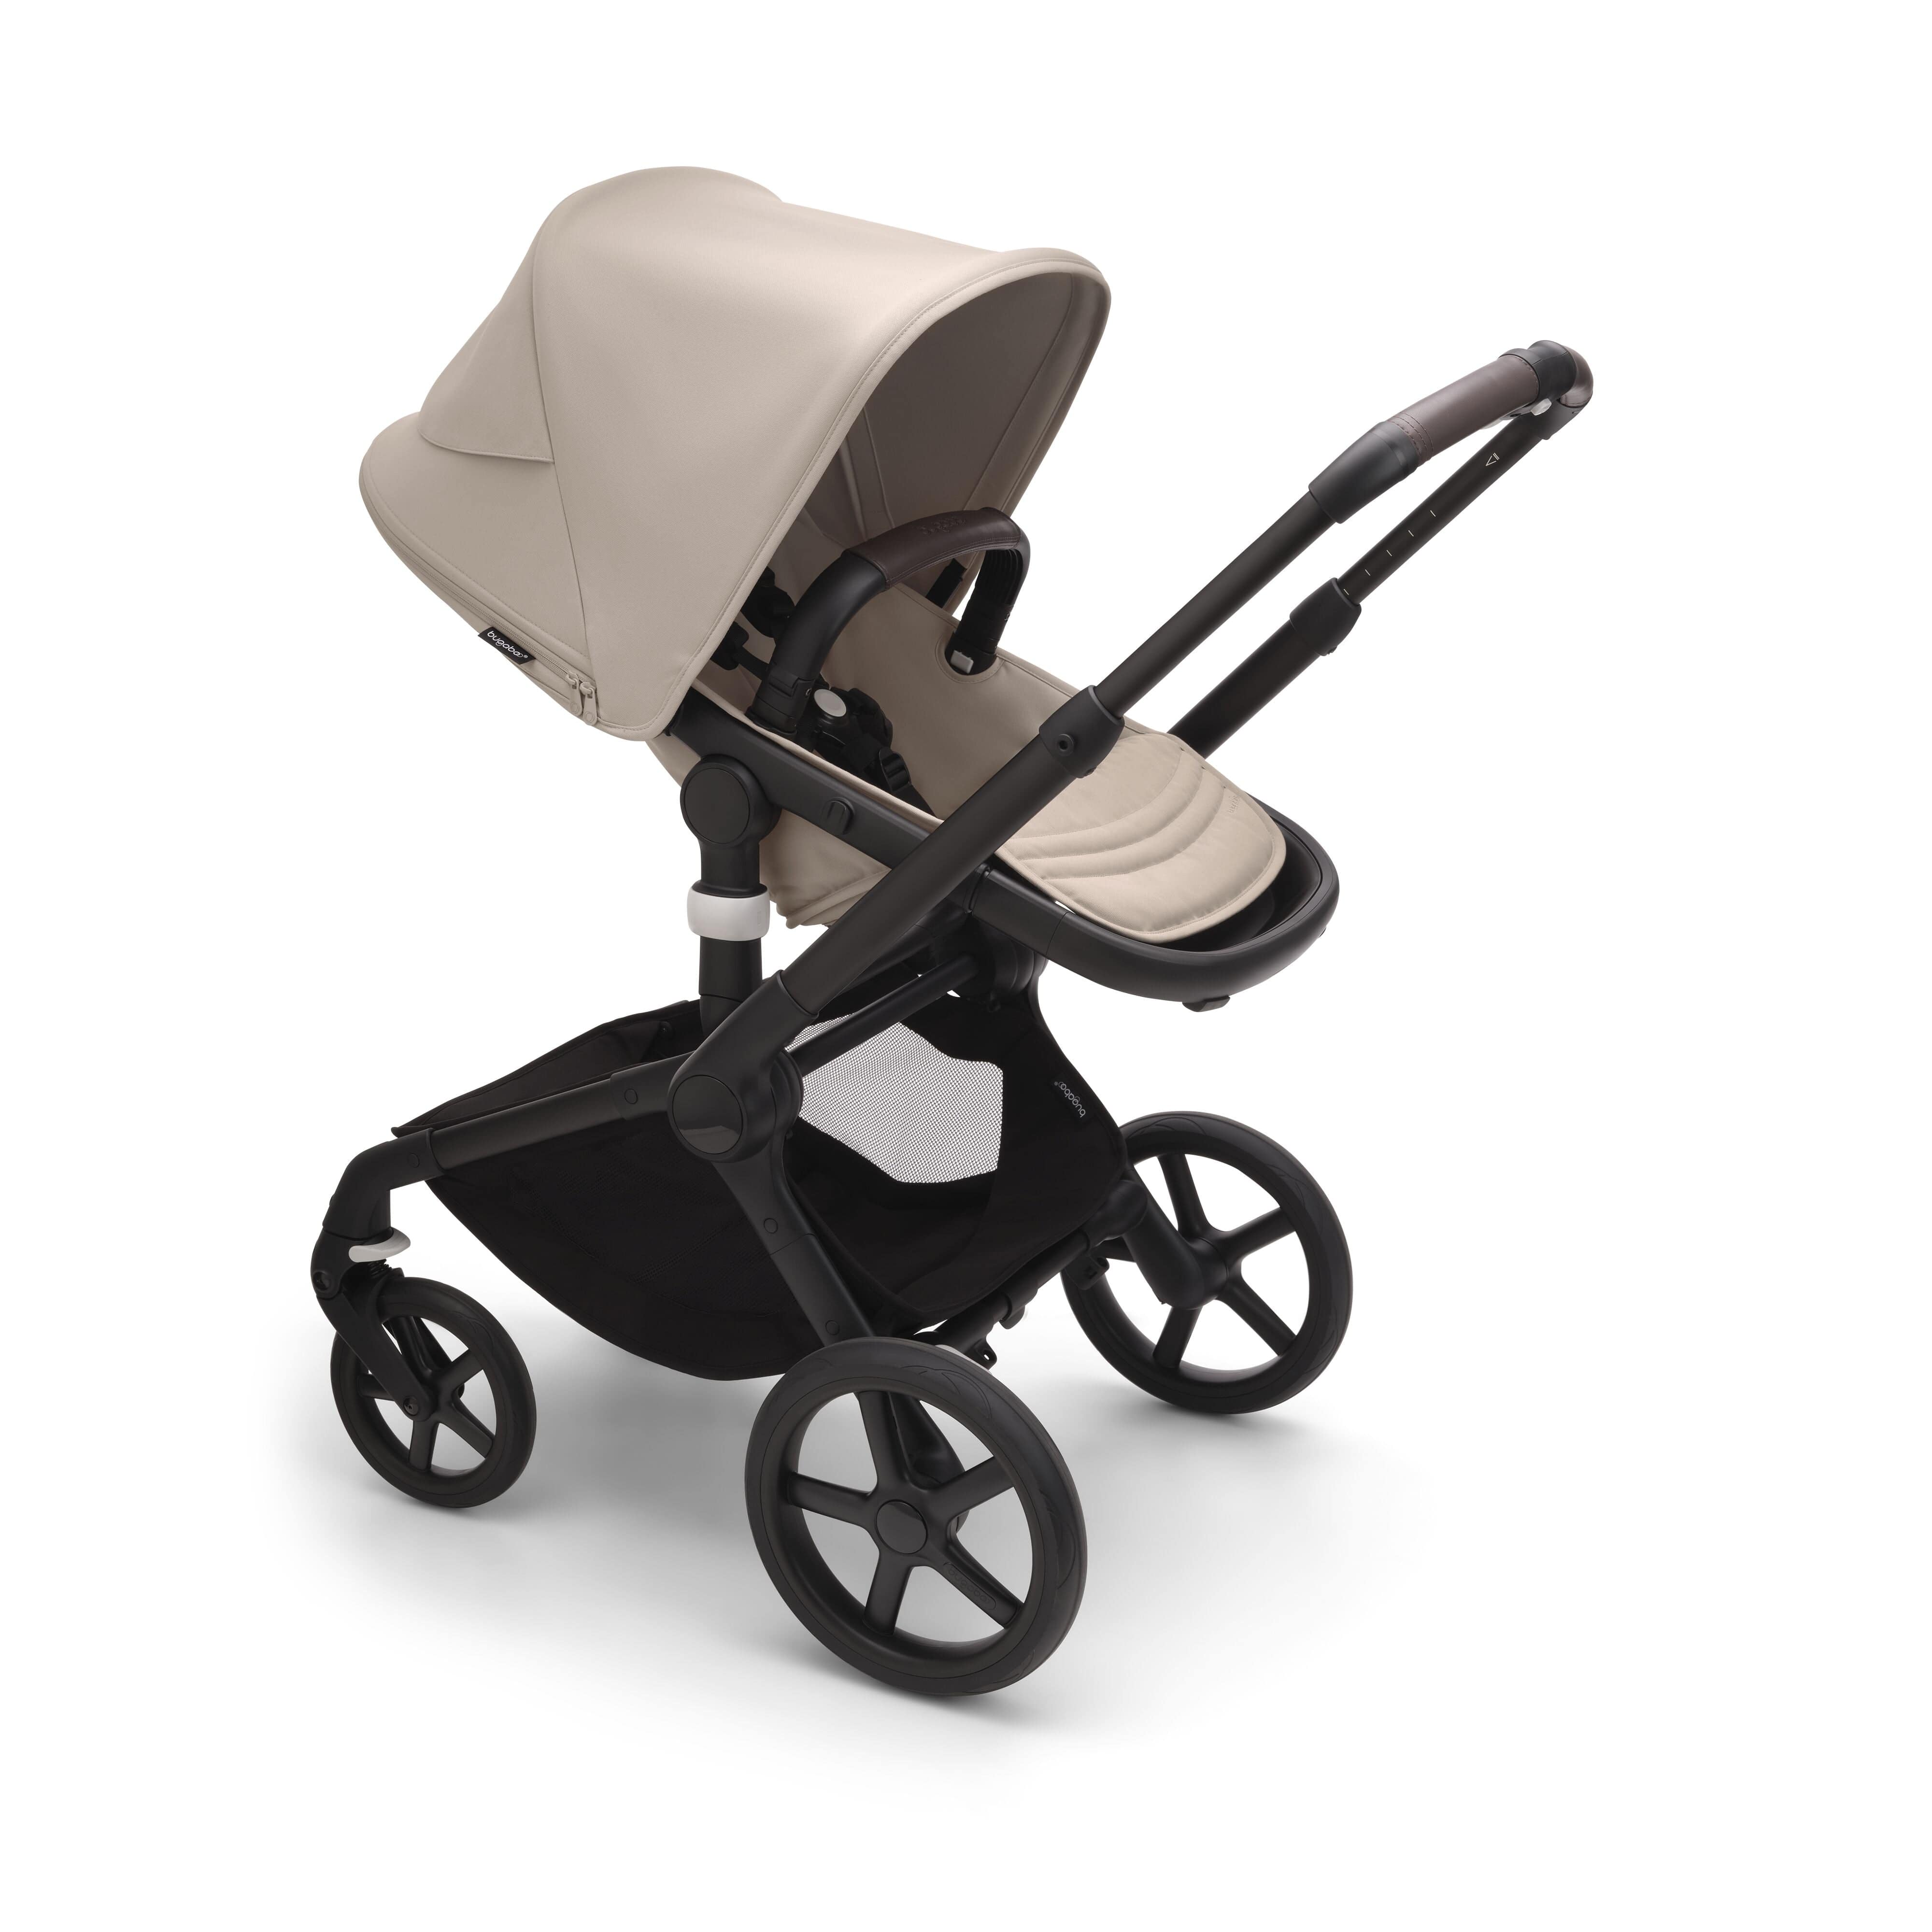 Introducing the Bugaboo Fox 5 🖤🖤 The all-terrain stroller for the be, Bugaboo Stroller